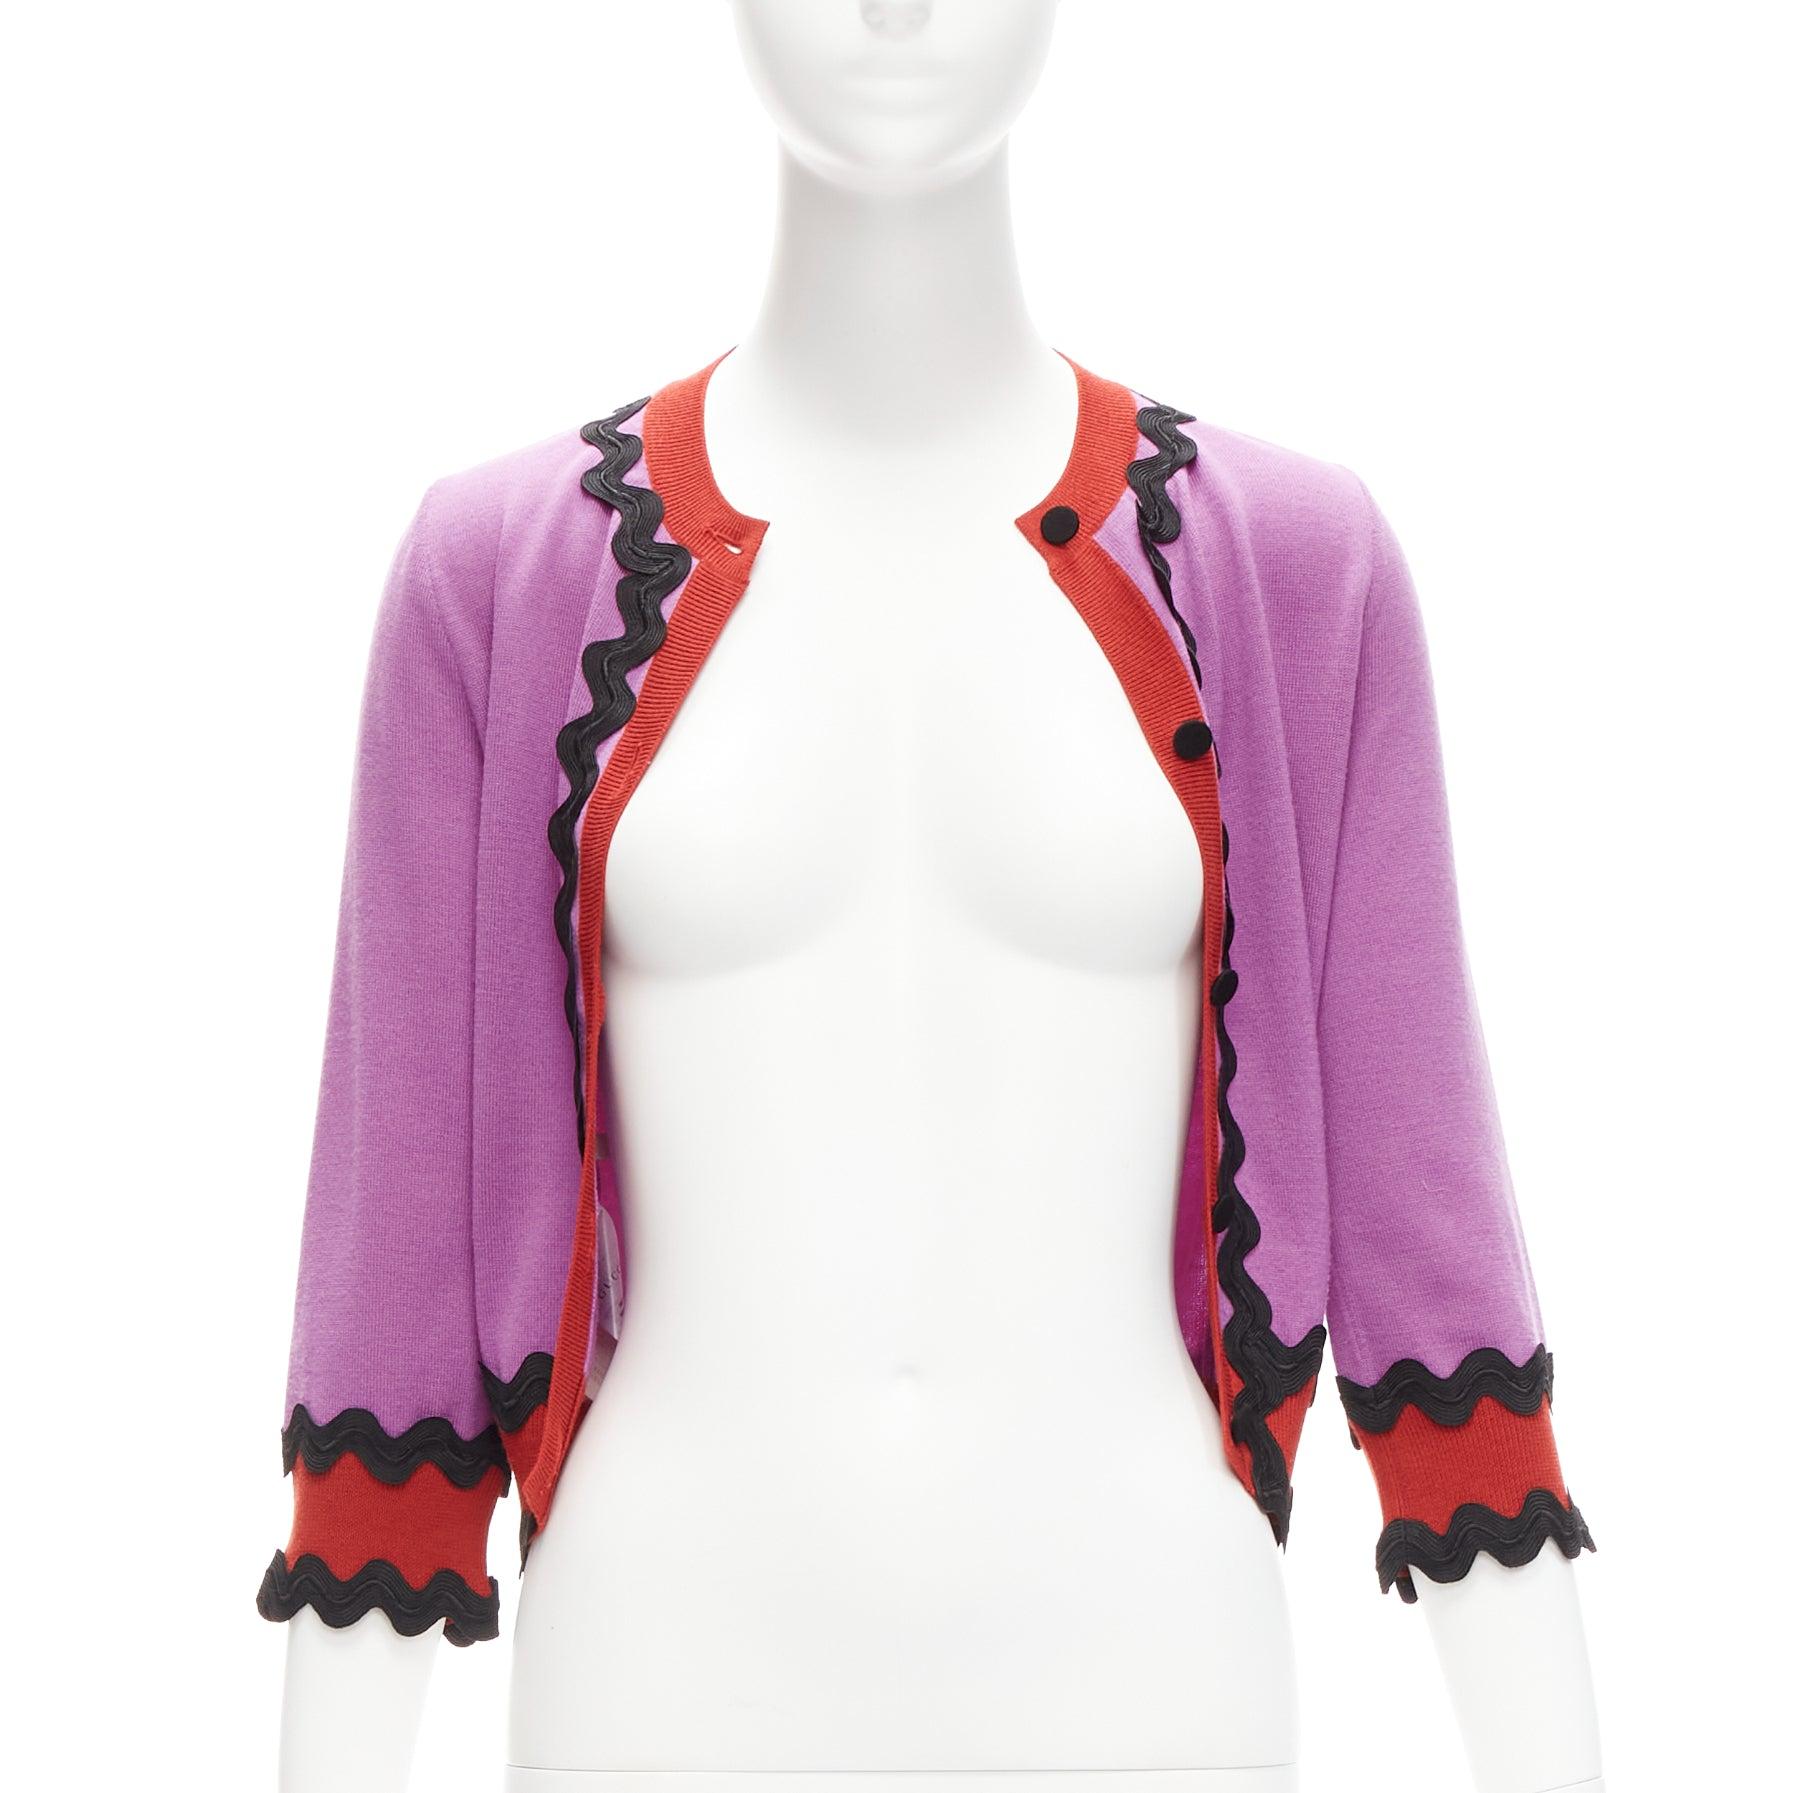 GUCCI 100% wool purple red black wavy trims cropped cardigan S
Reference: TGAS/D00927
Brand: Gucci
Designer: Alessandro Michele
Material: Wool
Color: Purple, Red
Pattern: Solid
Closure: Button
Extra Details: Fabric wrapped buttons. Wavy trims